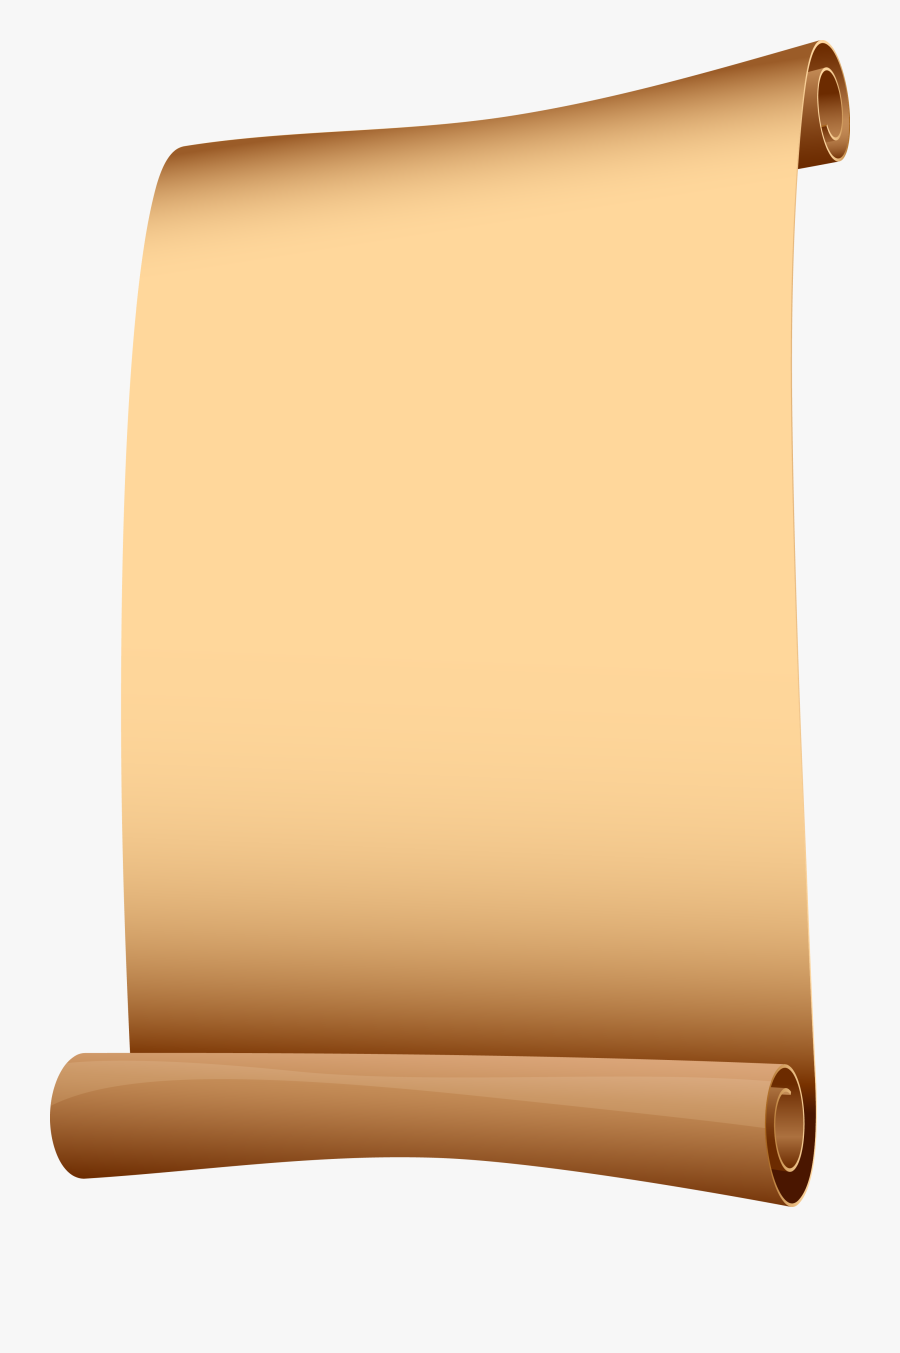 Paper Scroll Computer File - Transparent Scroll Vector Png, Transparent Clipart